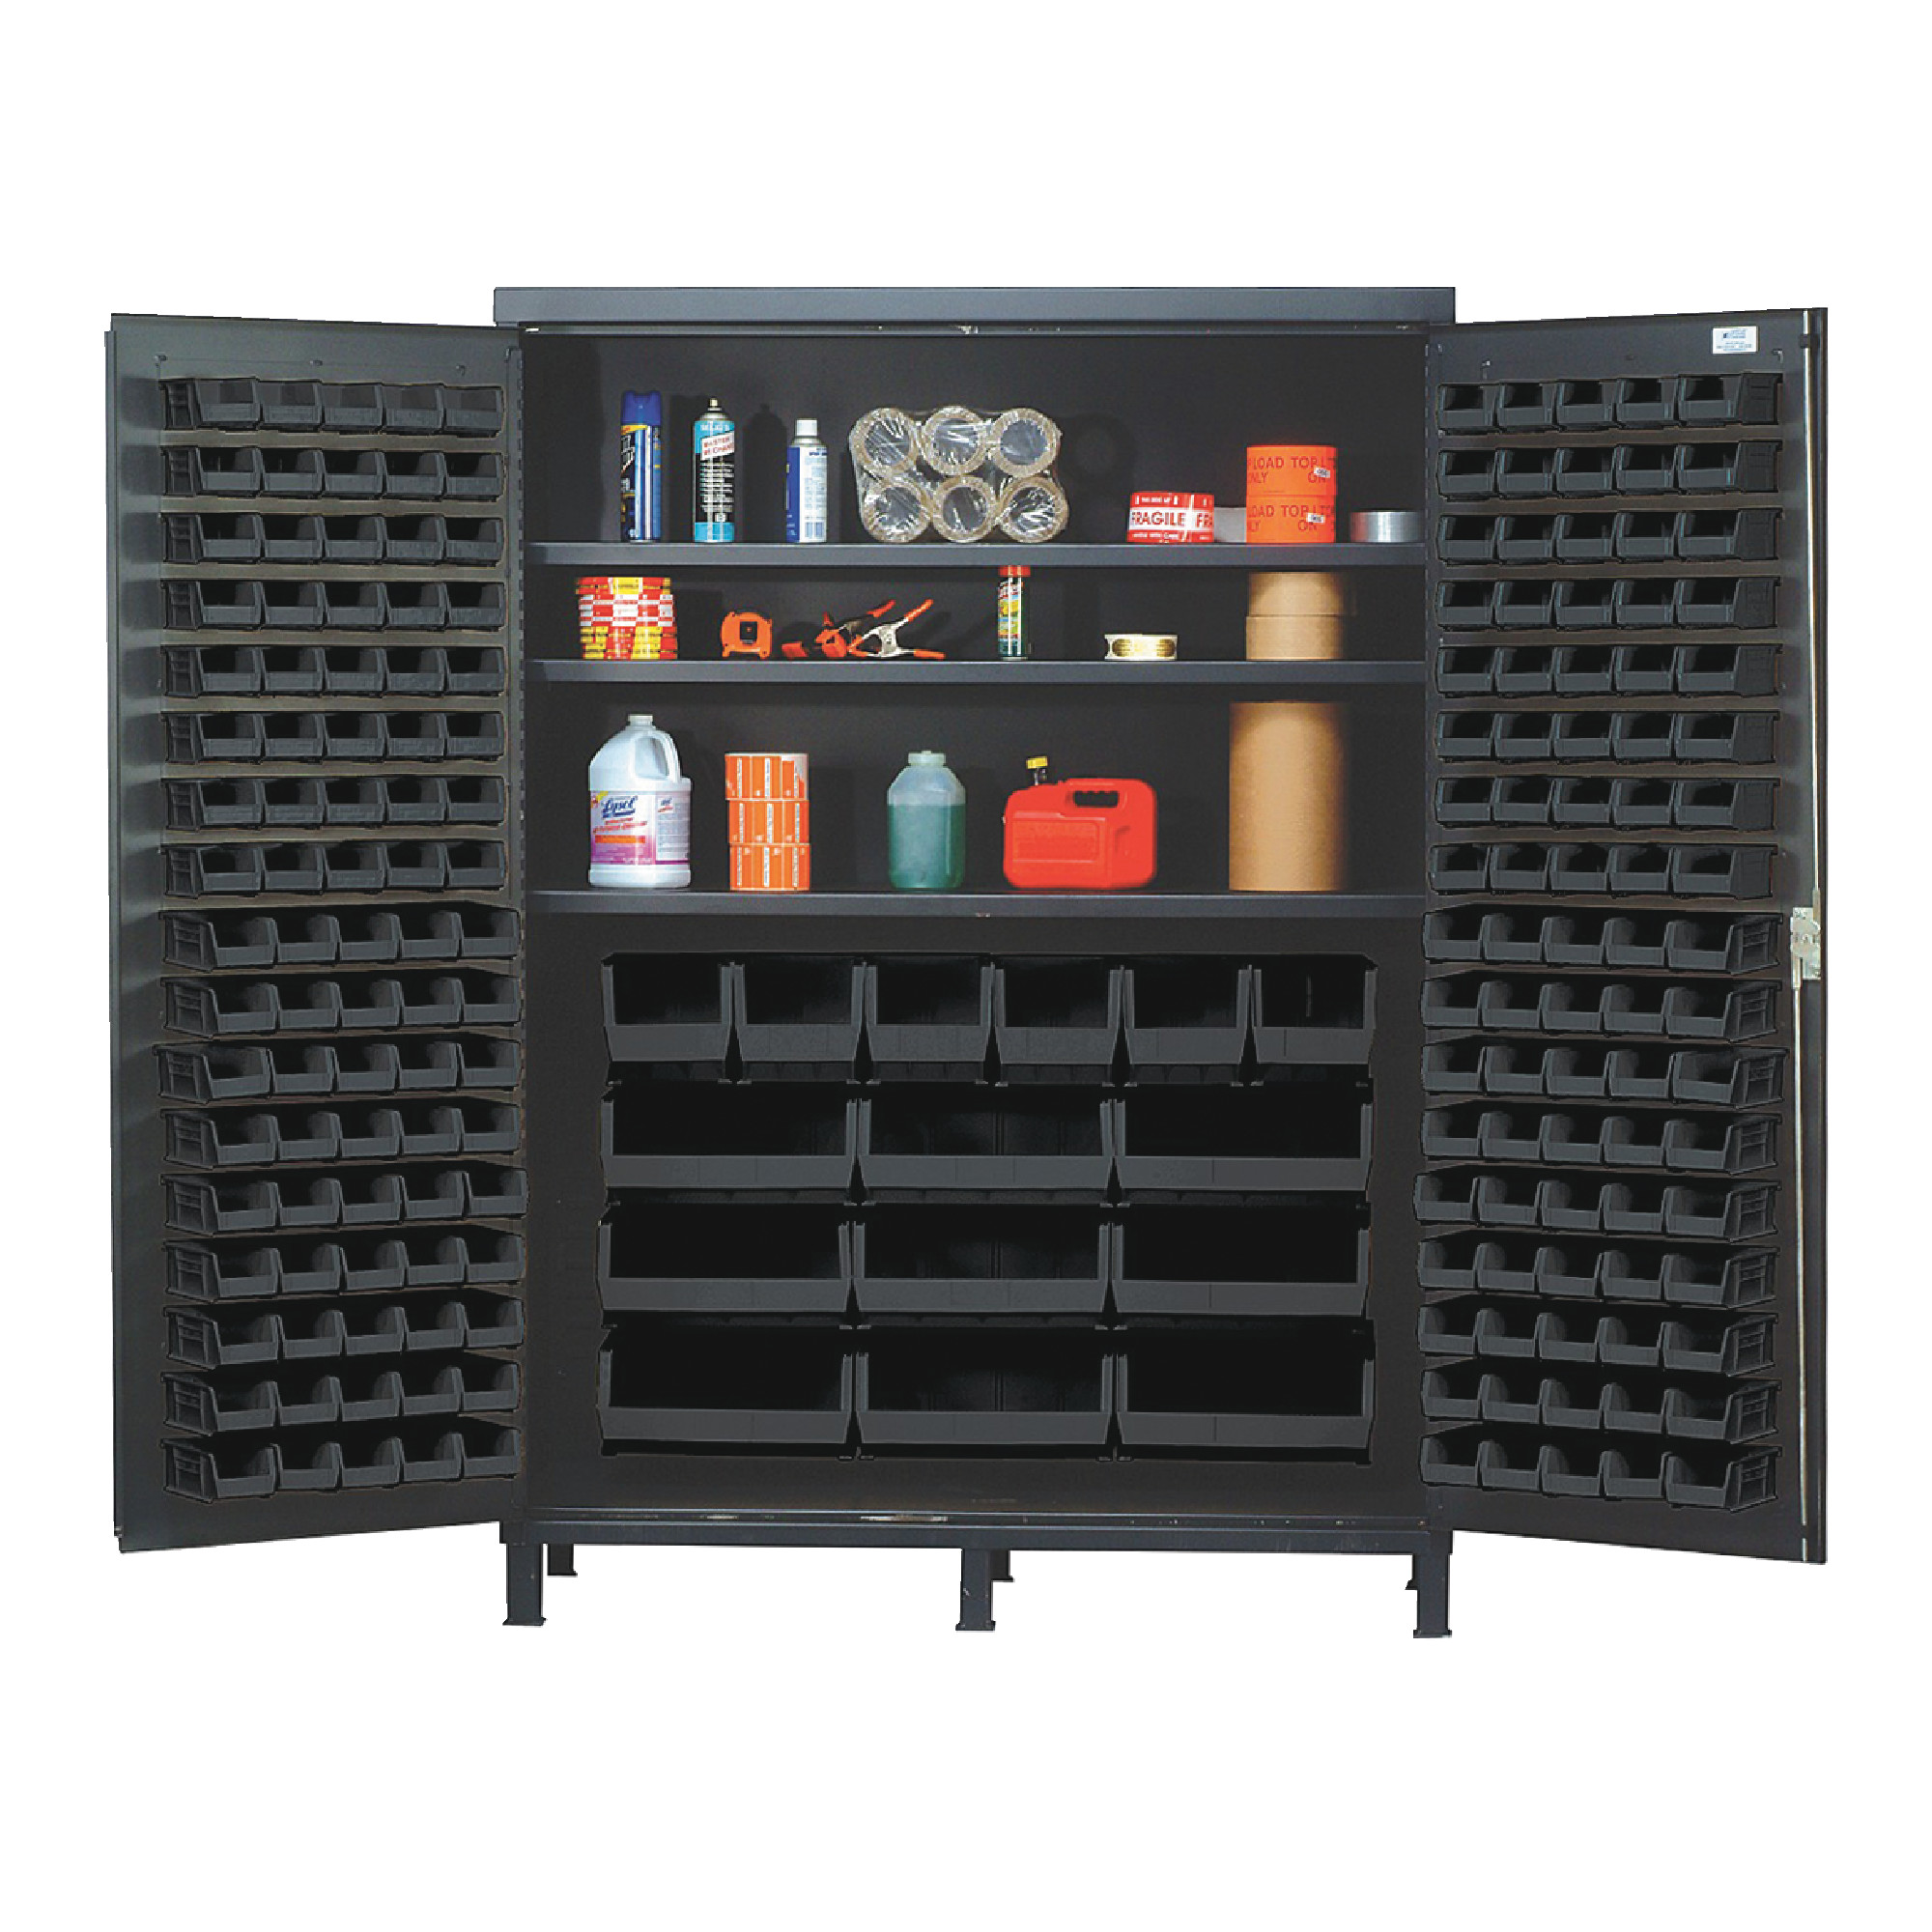 QUANTUM STORAGE SYSTEMS 60" Super Wide Colossal Heavy-Duty Floor Cabinet With 185 Black Bins